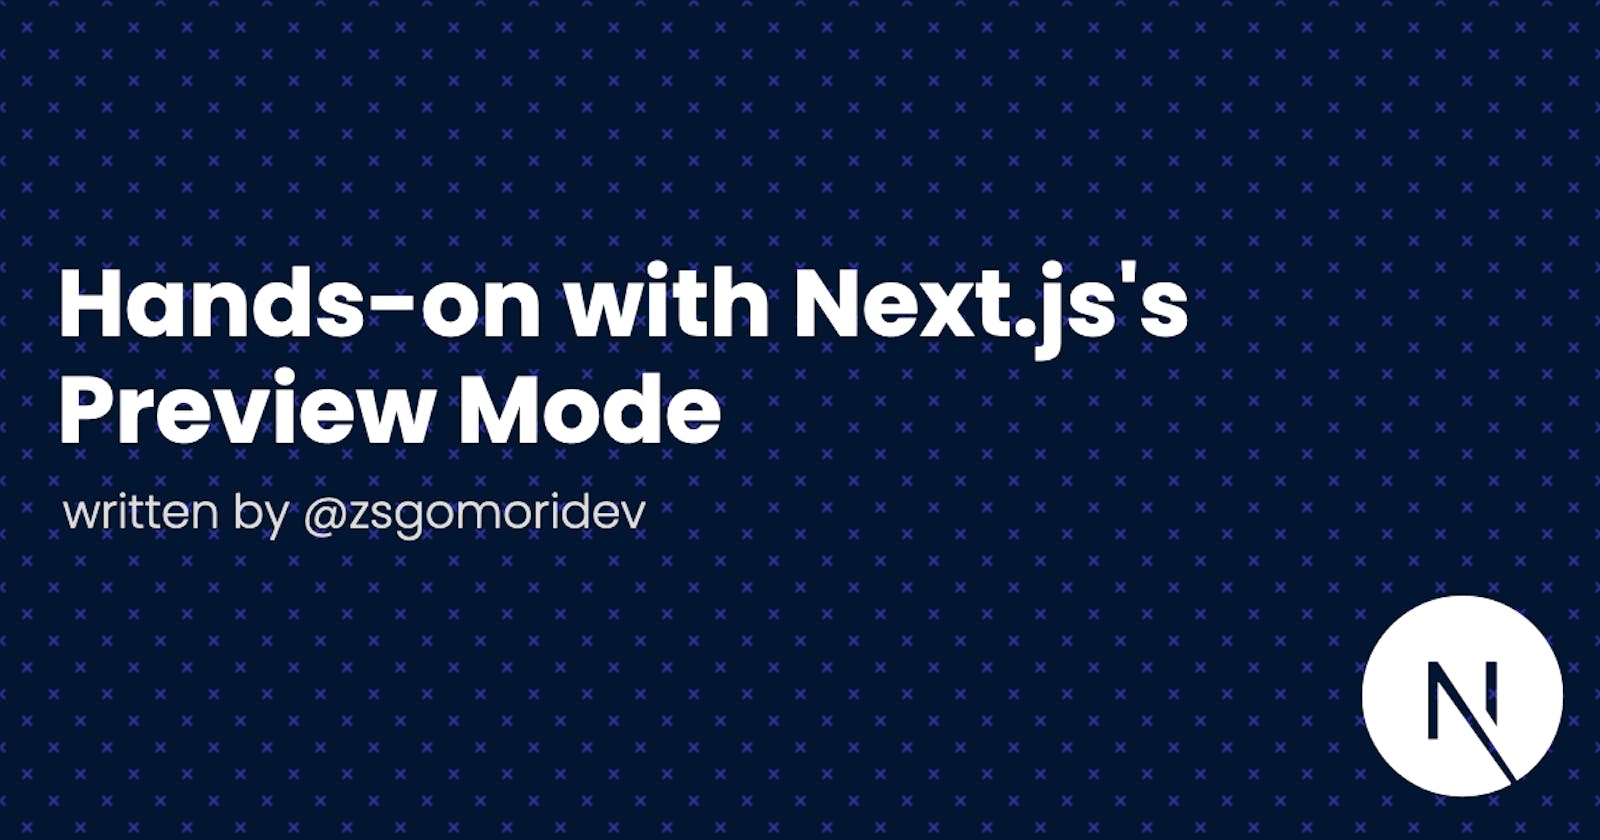 Hands-on with Next.js’s Preview Mode